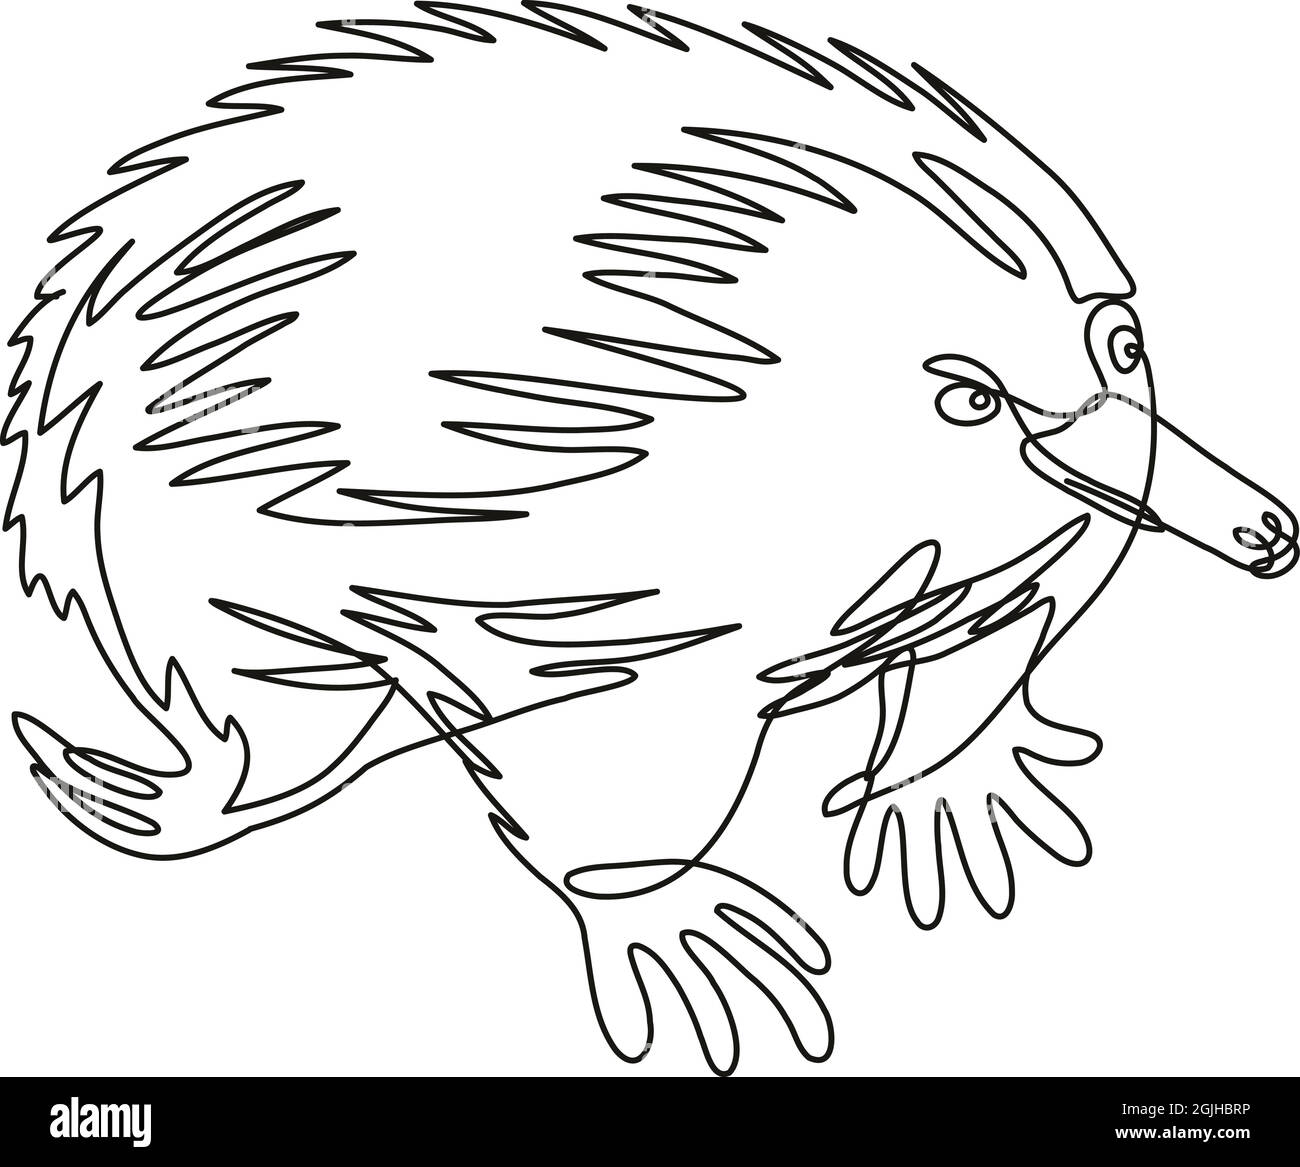 Continuous line drawing illustration of an Echidna or spiny anteater side view done in mono line or doodle style in black and white on isolated backgr Stock Vector